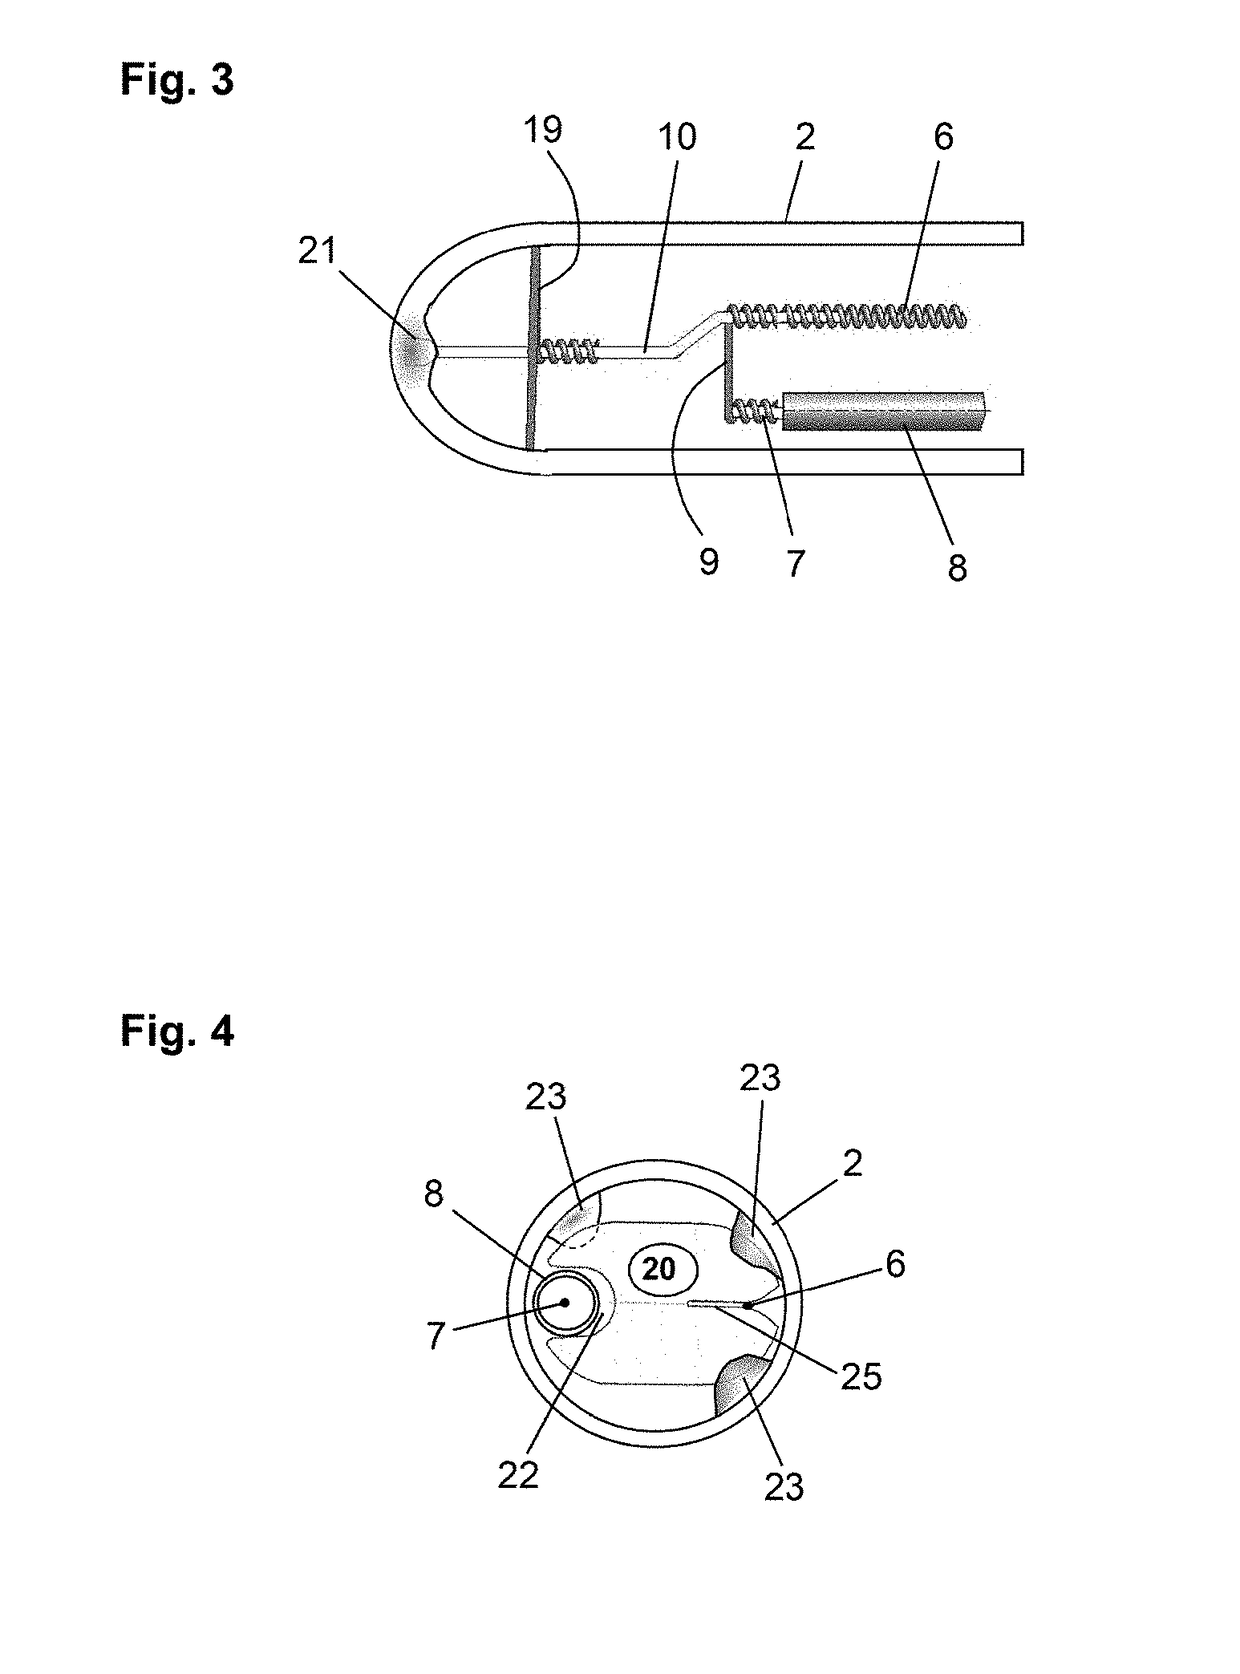 Irradiation device for introducing infrared radiation into a vacuum processing chamber using an infrared emitter capped on one end